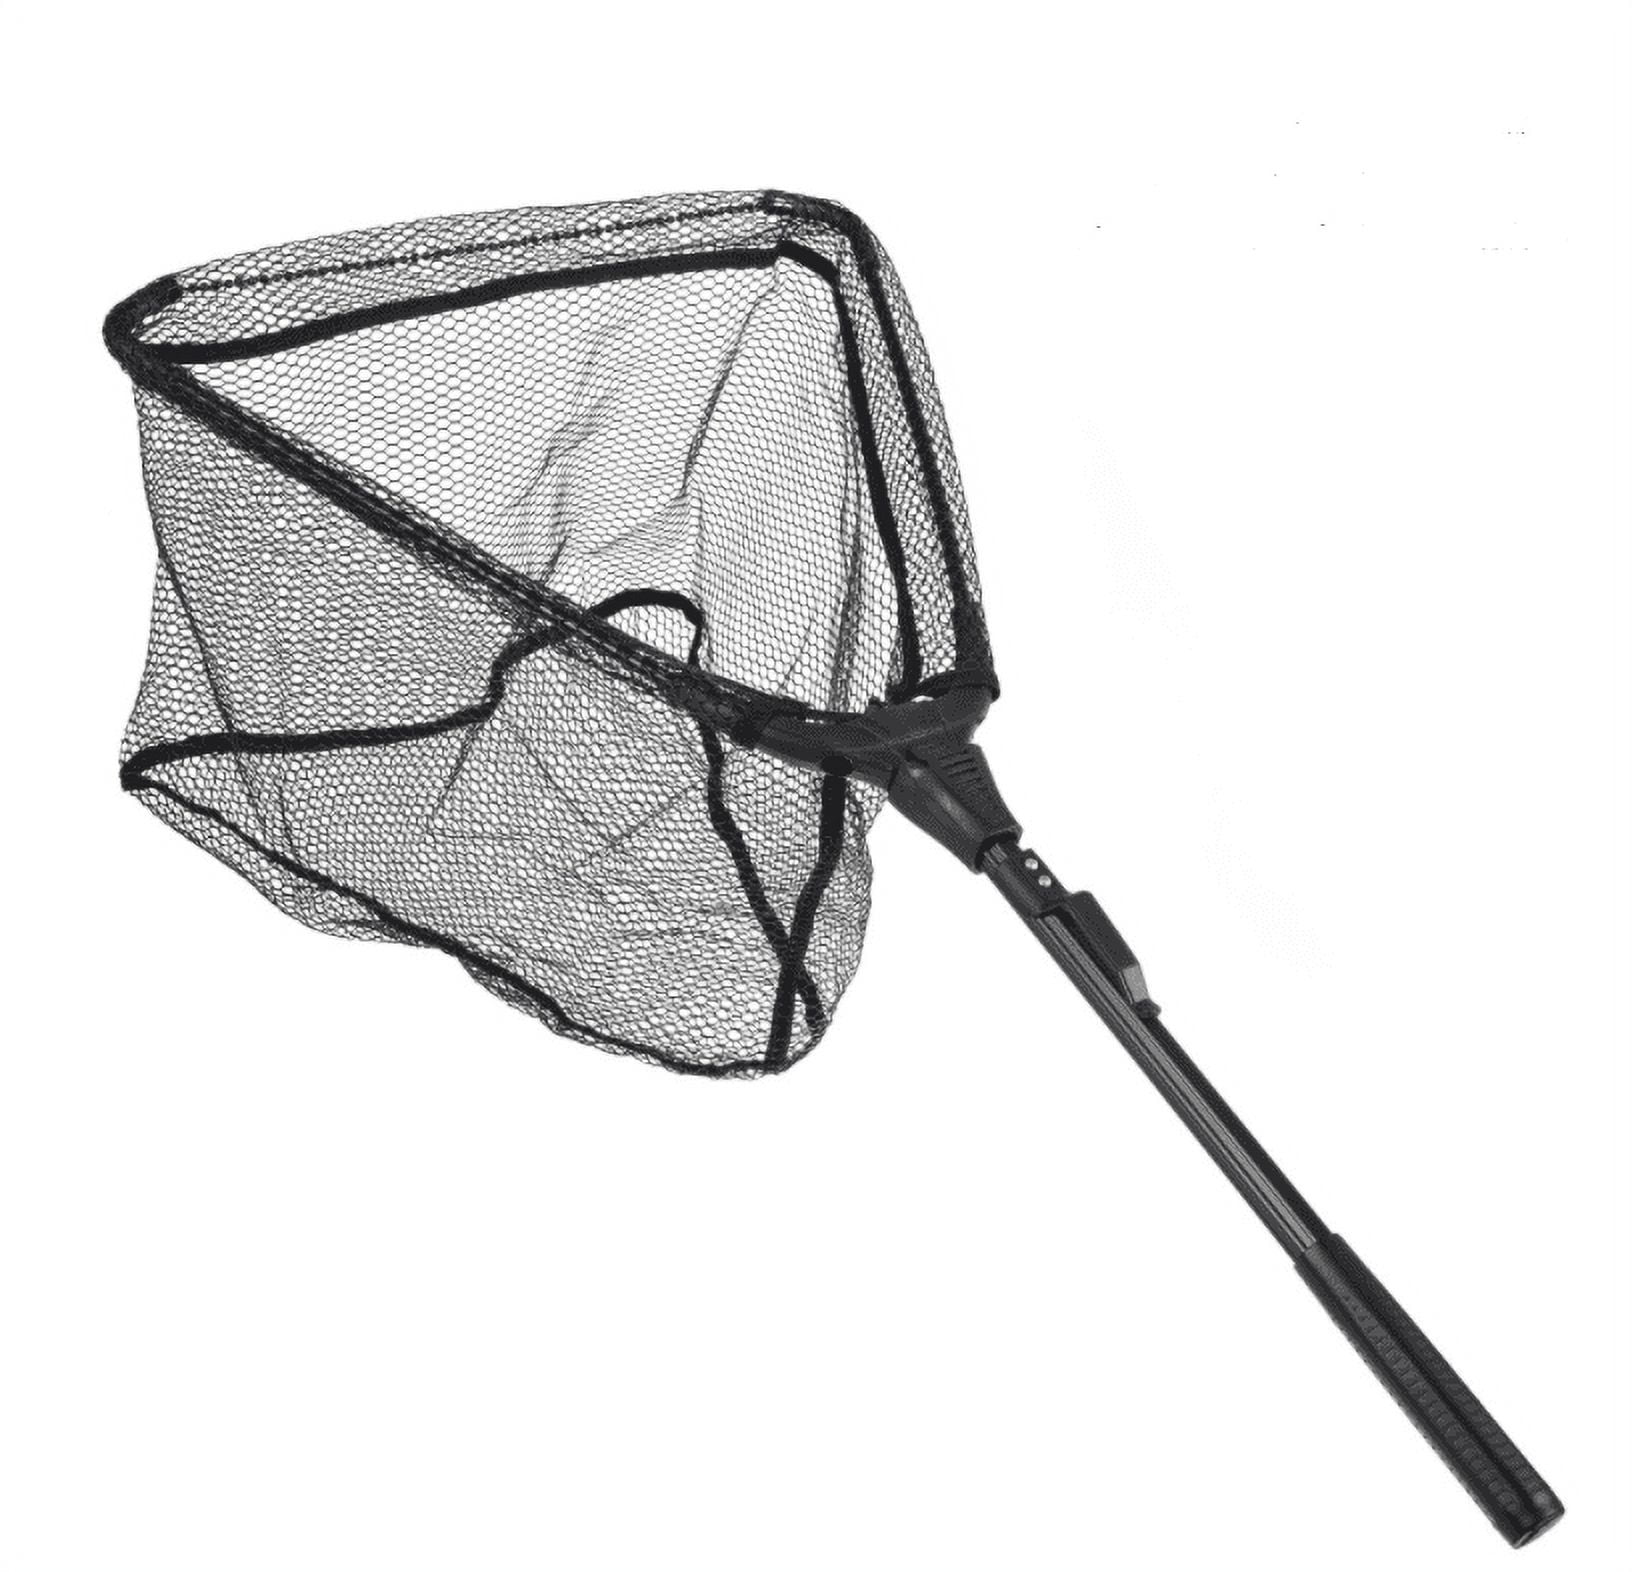 BLISSWILL Large Fishing Net Collapsible Fish Landing Net with